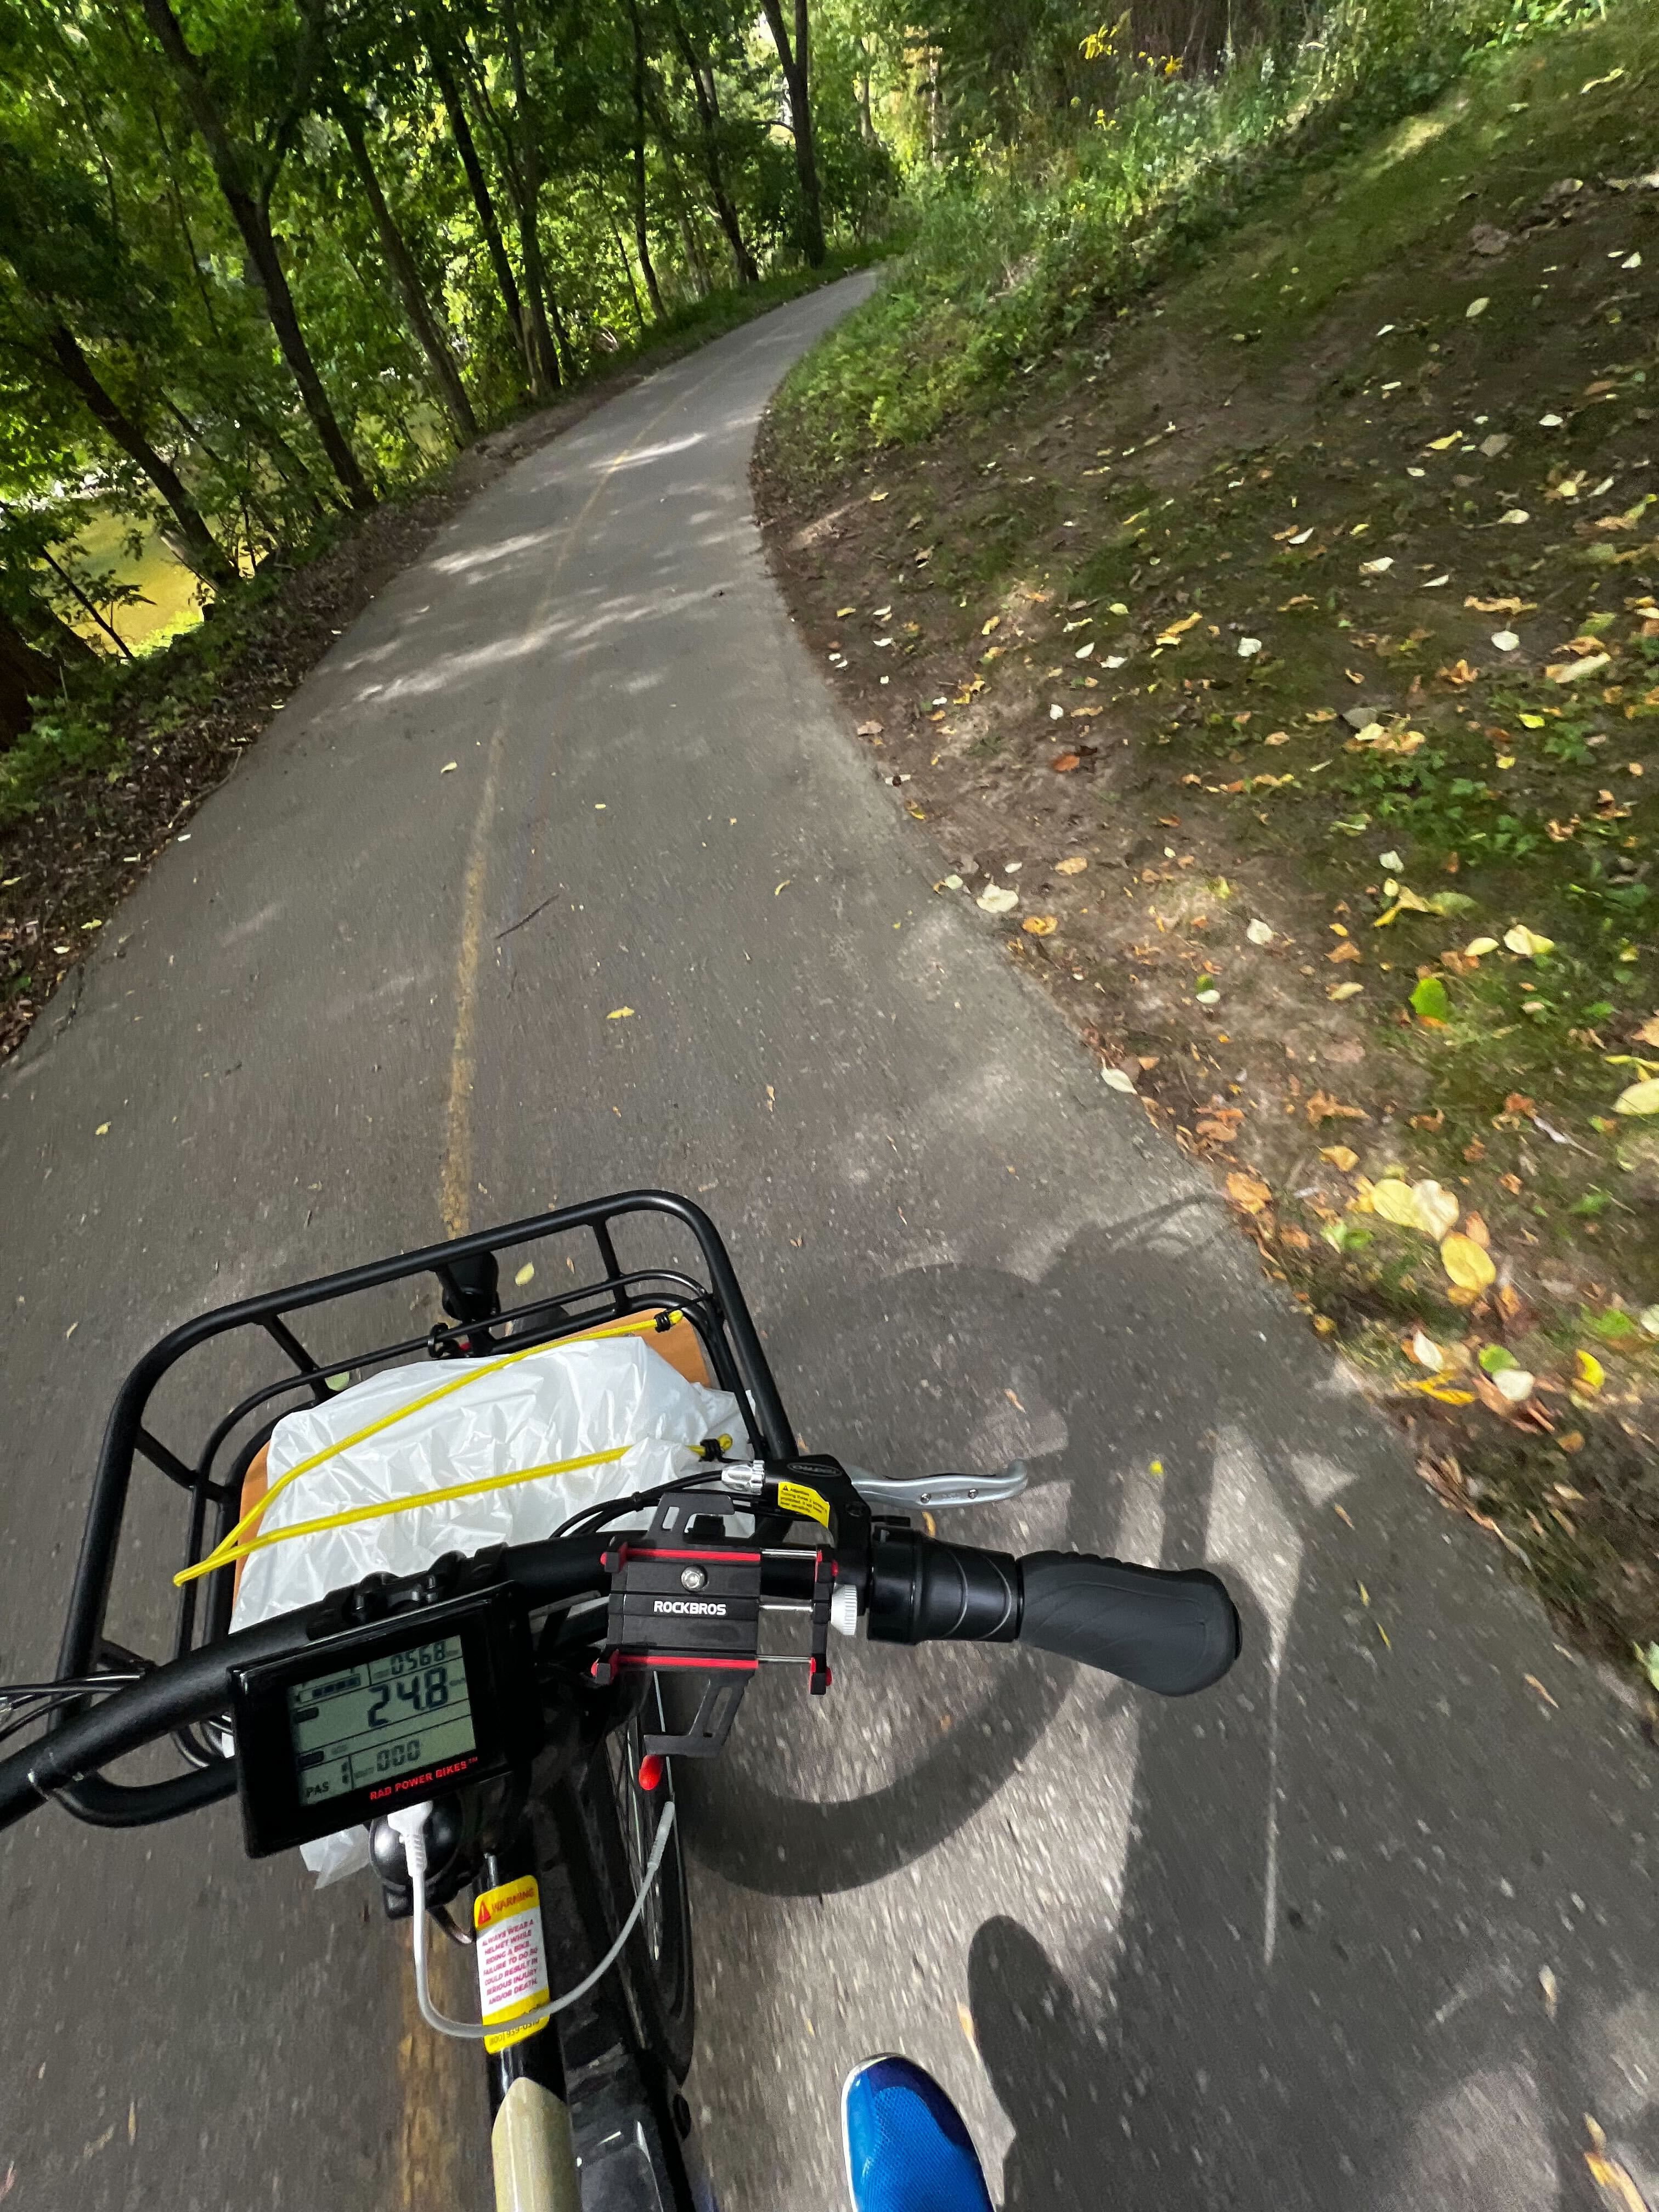 A photo taken from the bike seat on a ride through the forest